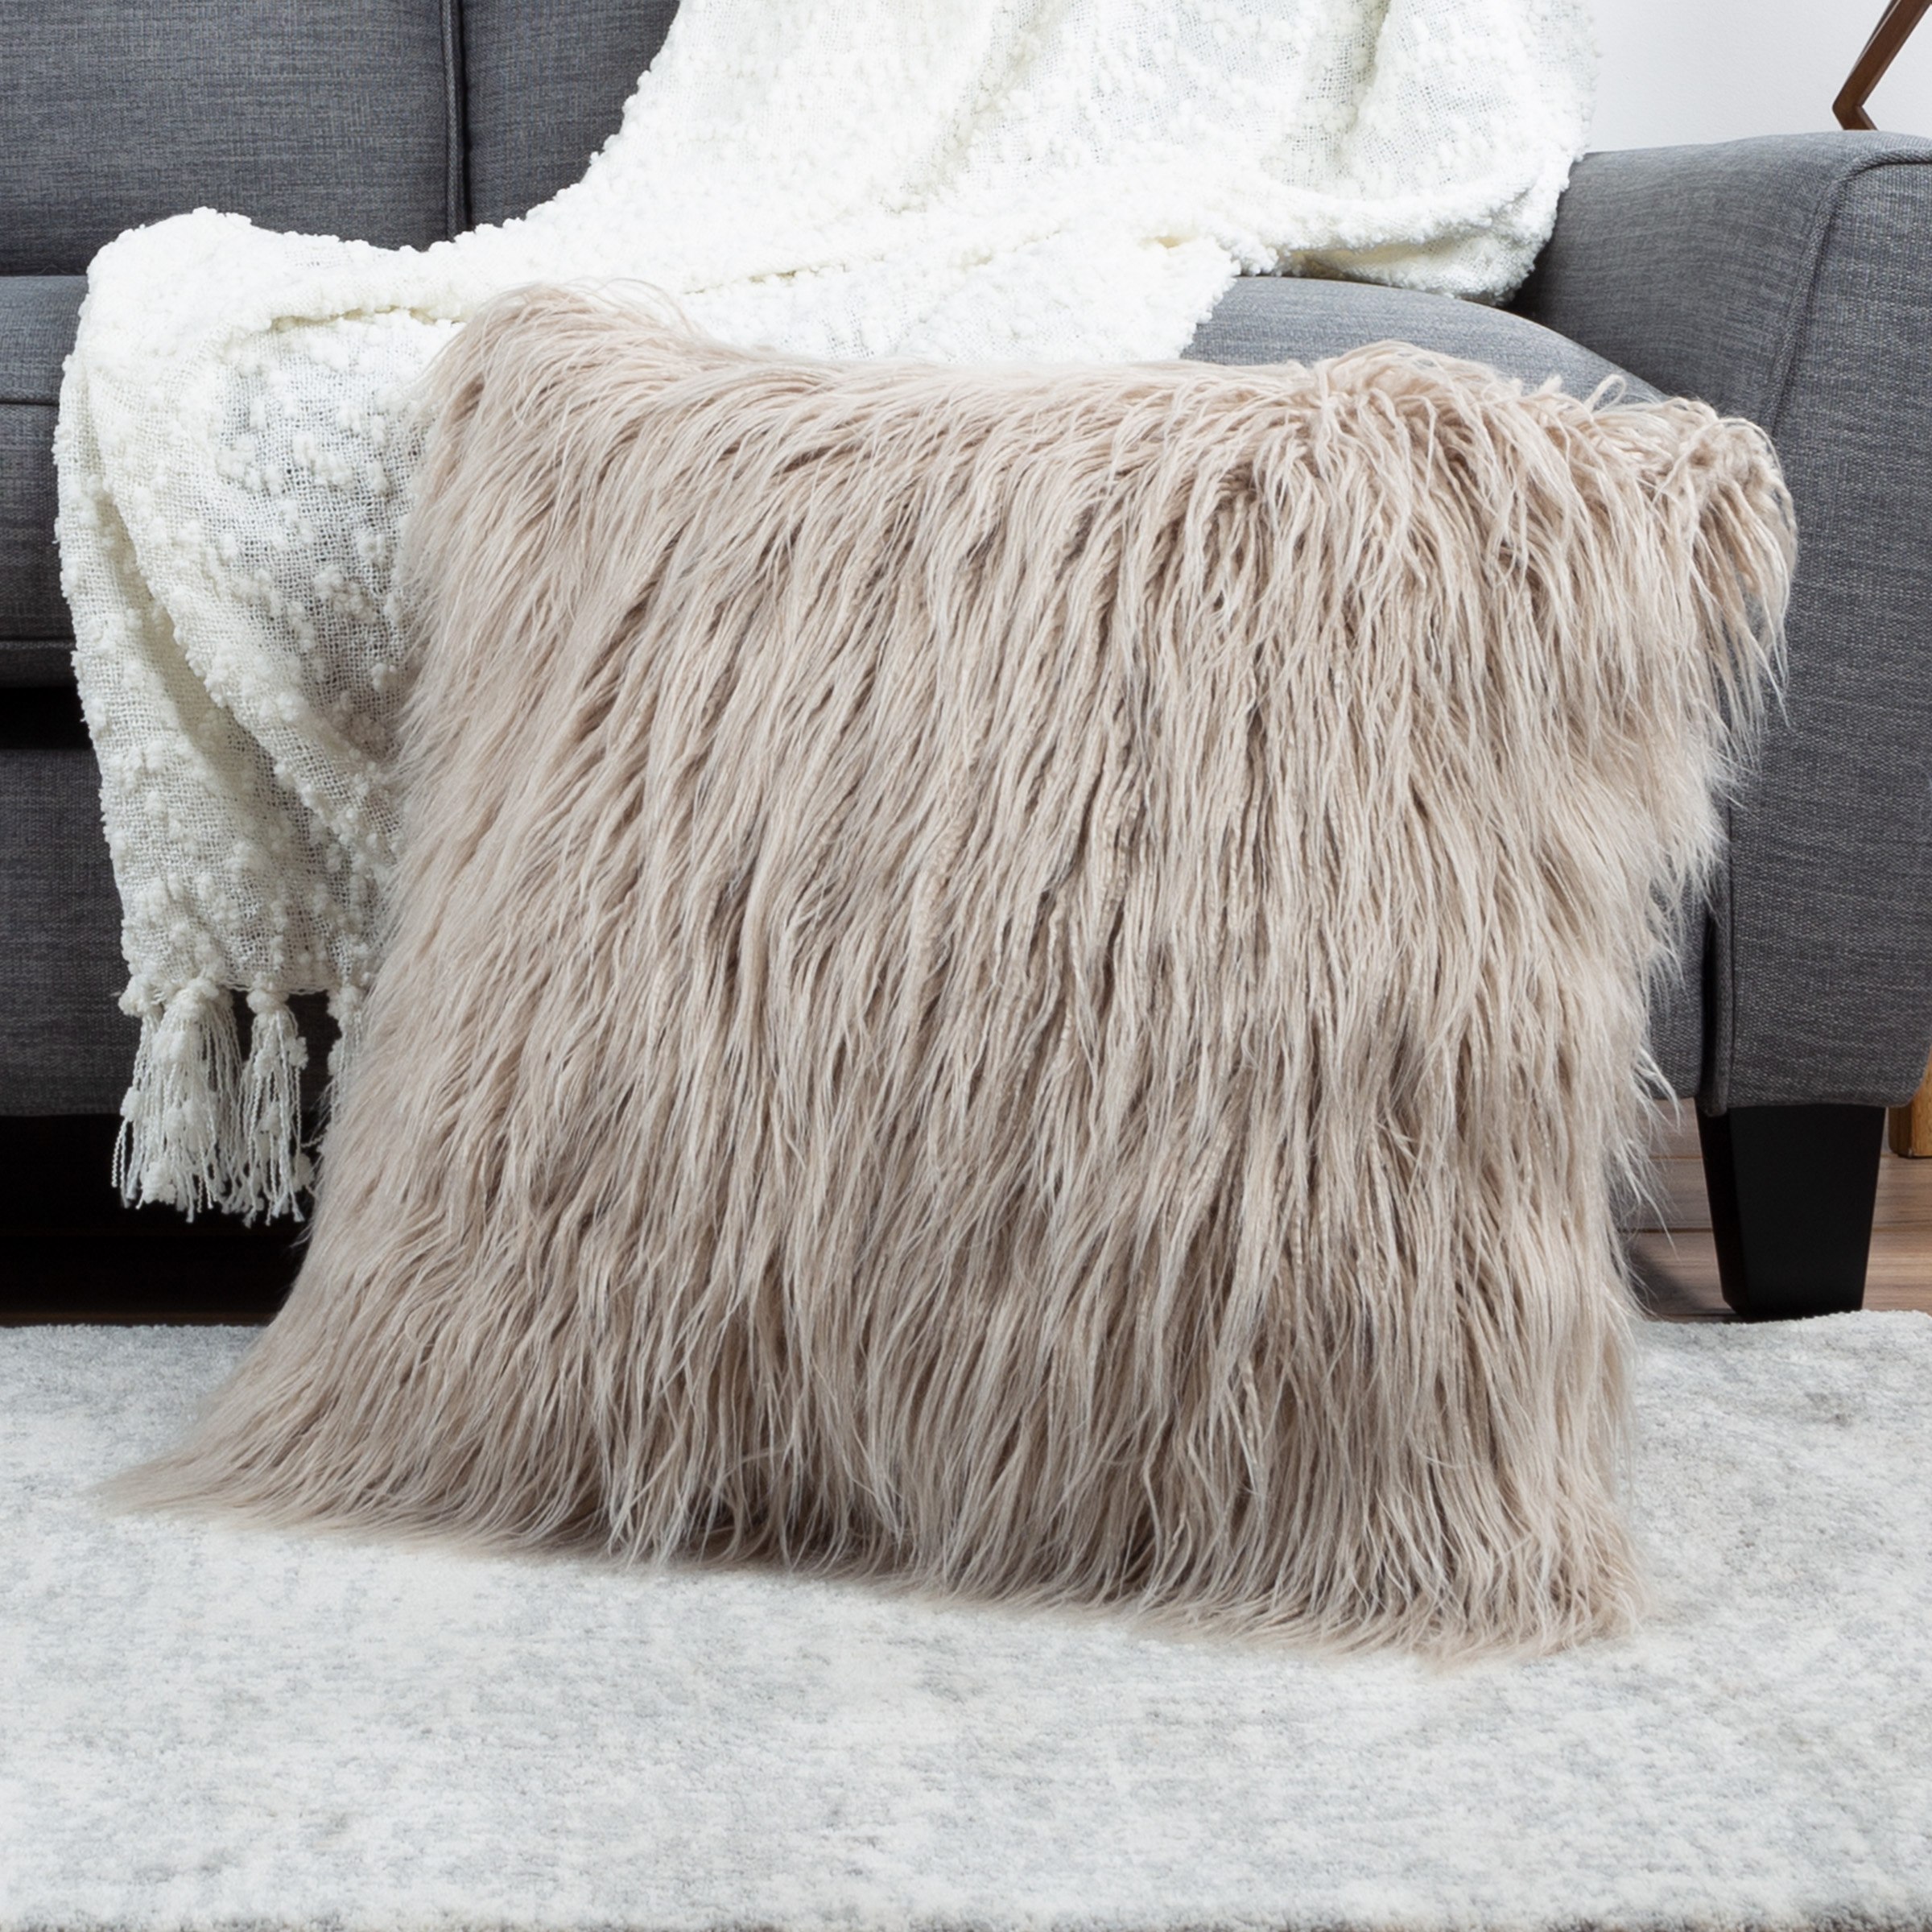 22 In Mongolian Faux Fur Throw Accent Pillow 7 In Thick Square Shag Style XL - Coffee